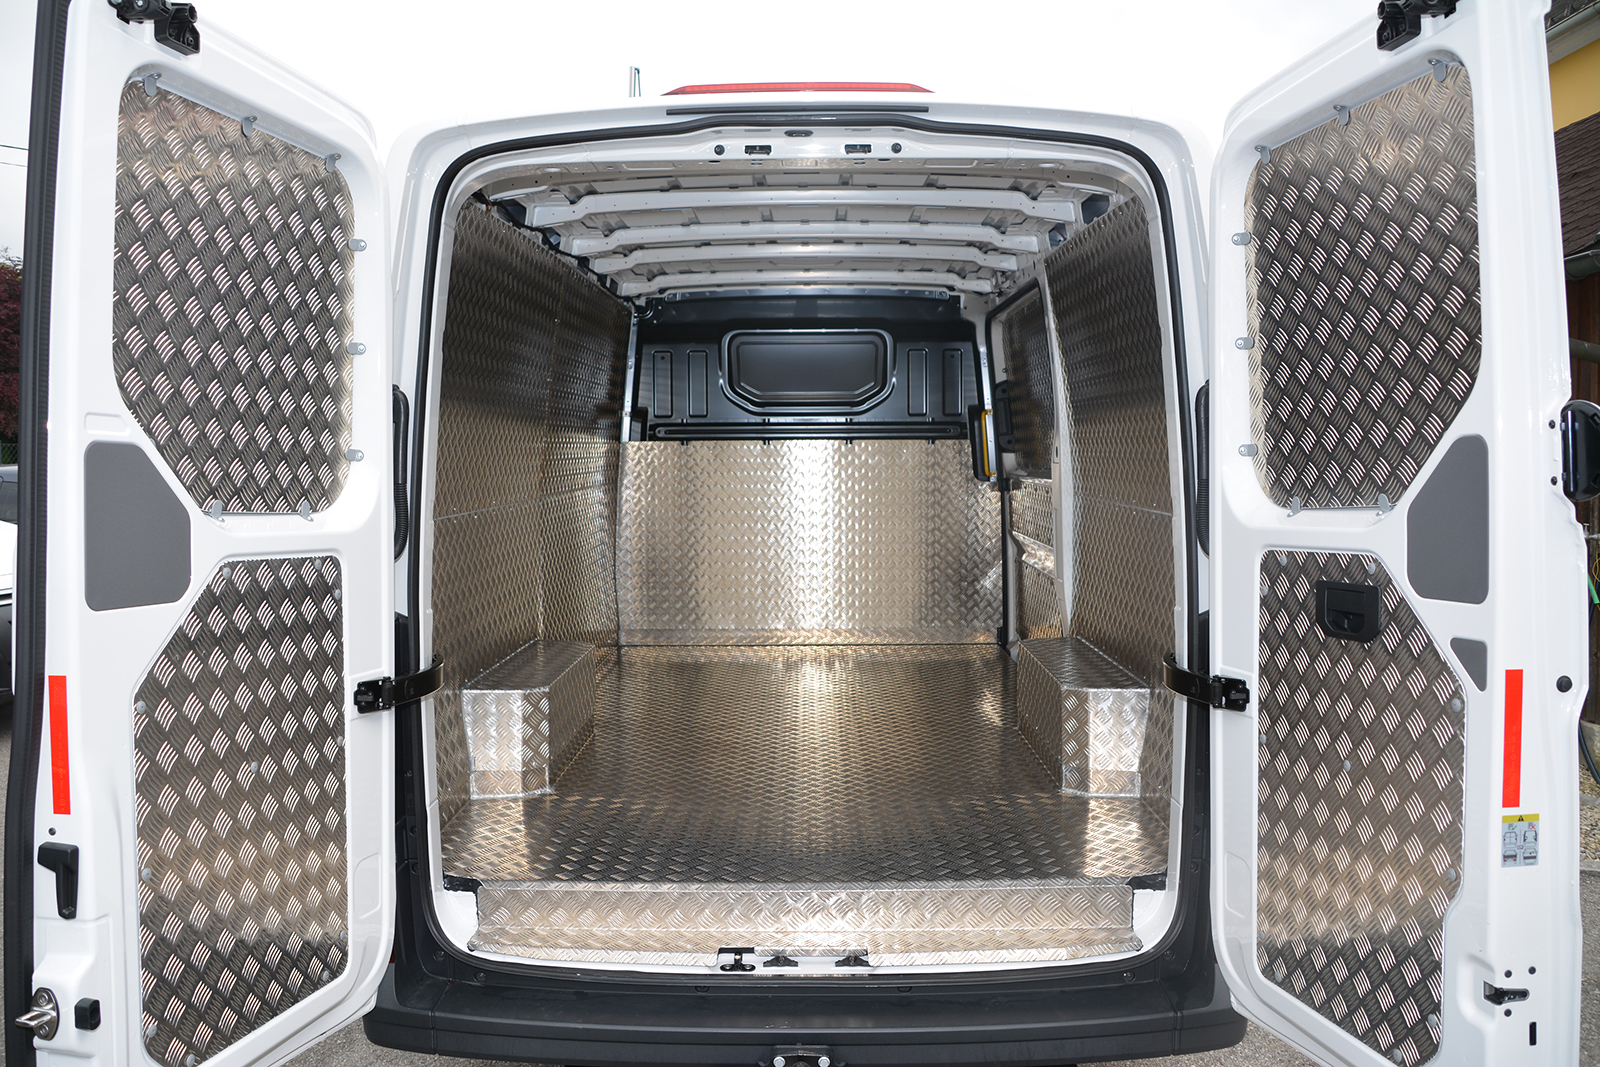 haselberger_vw_crafter_29